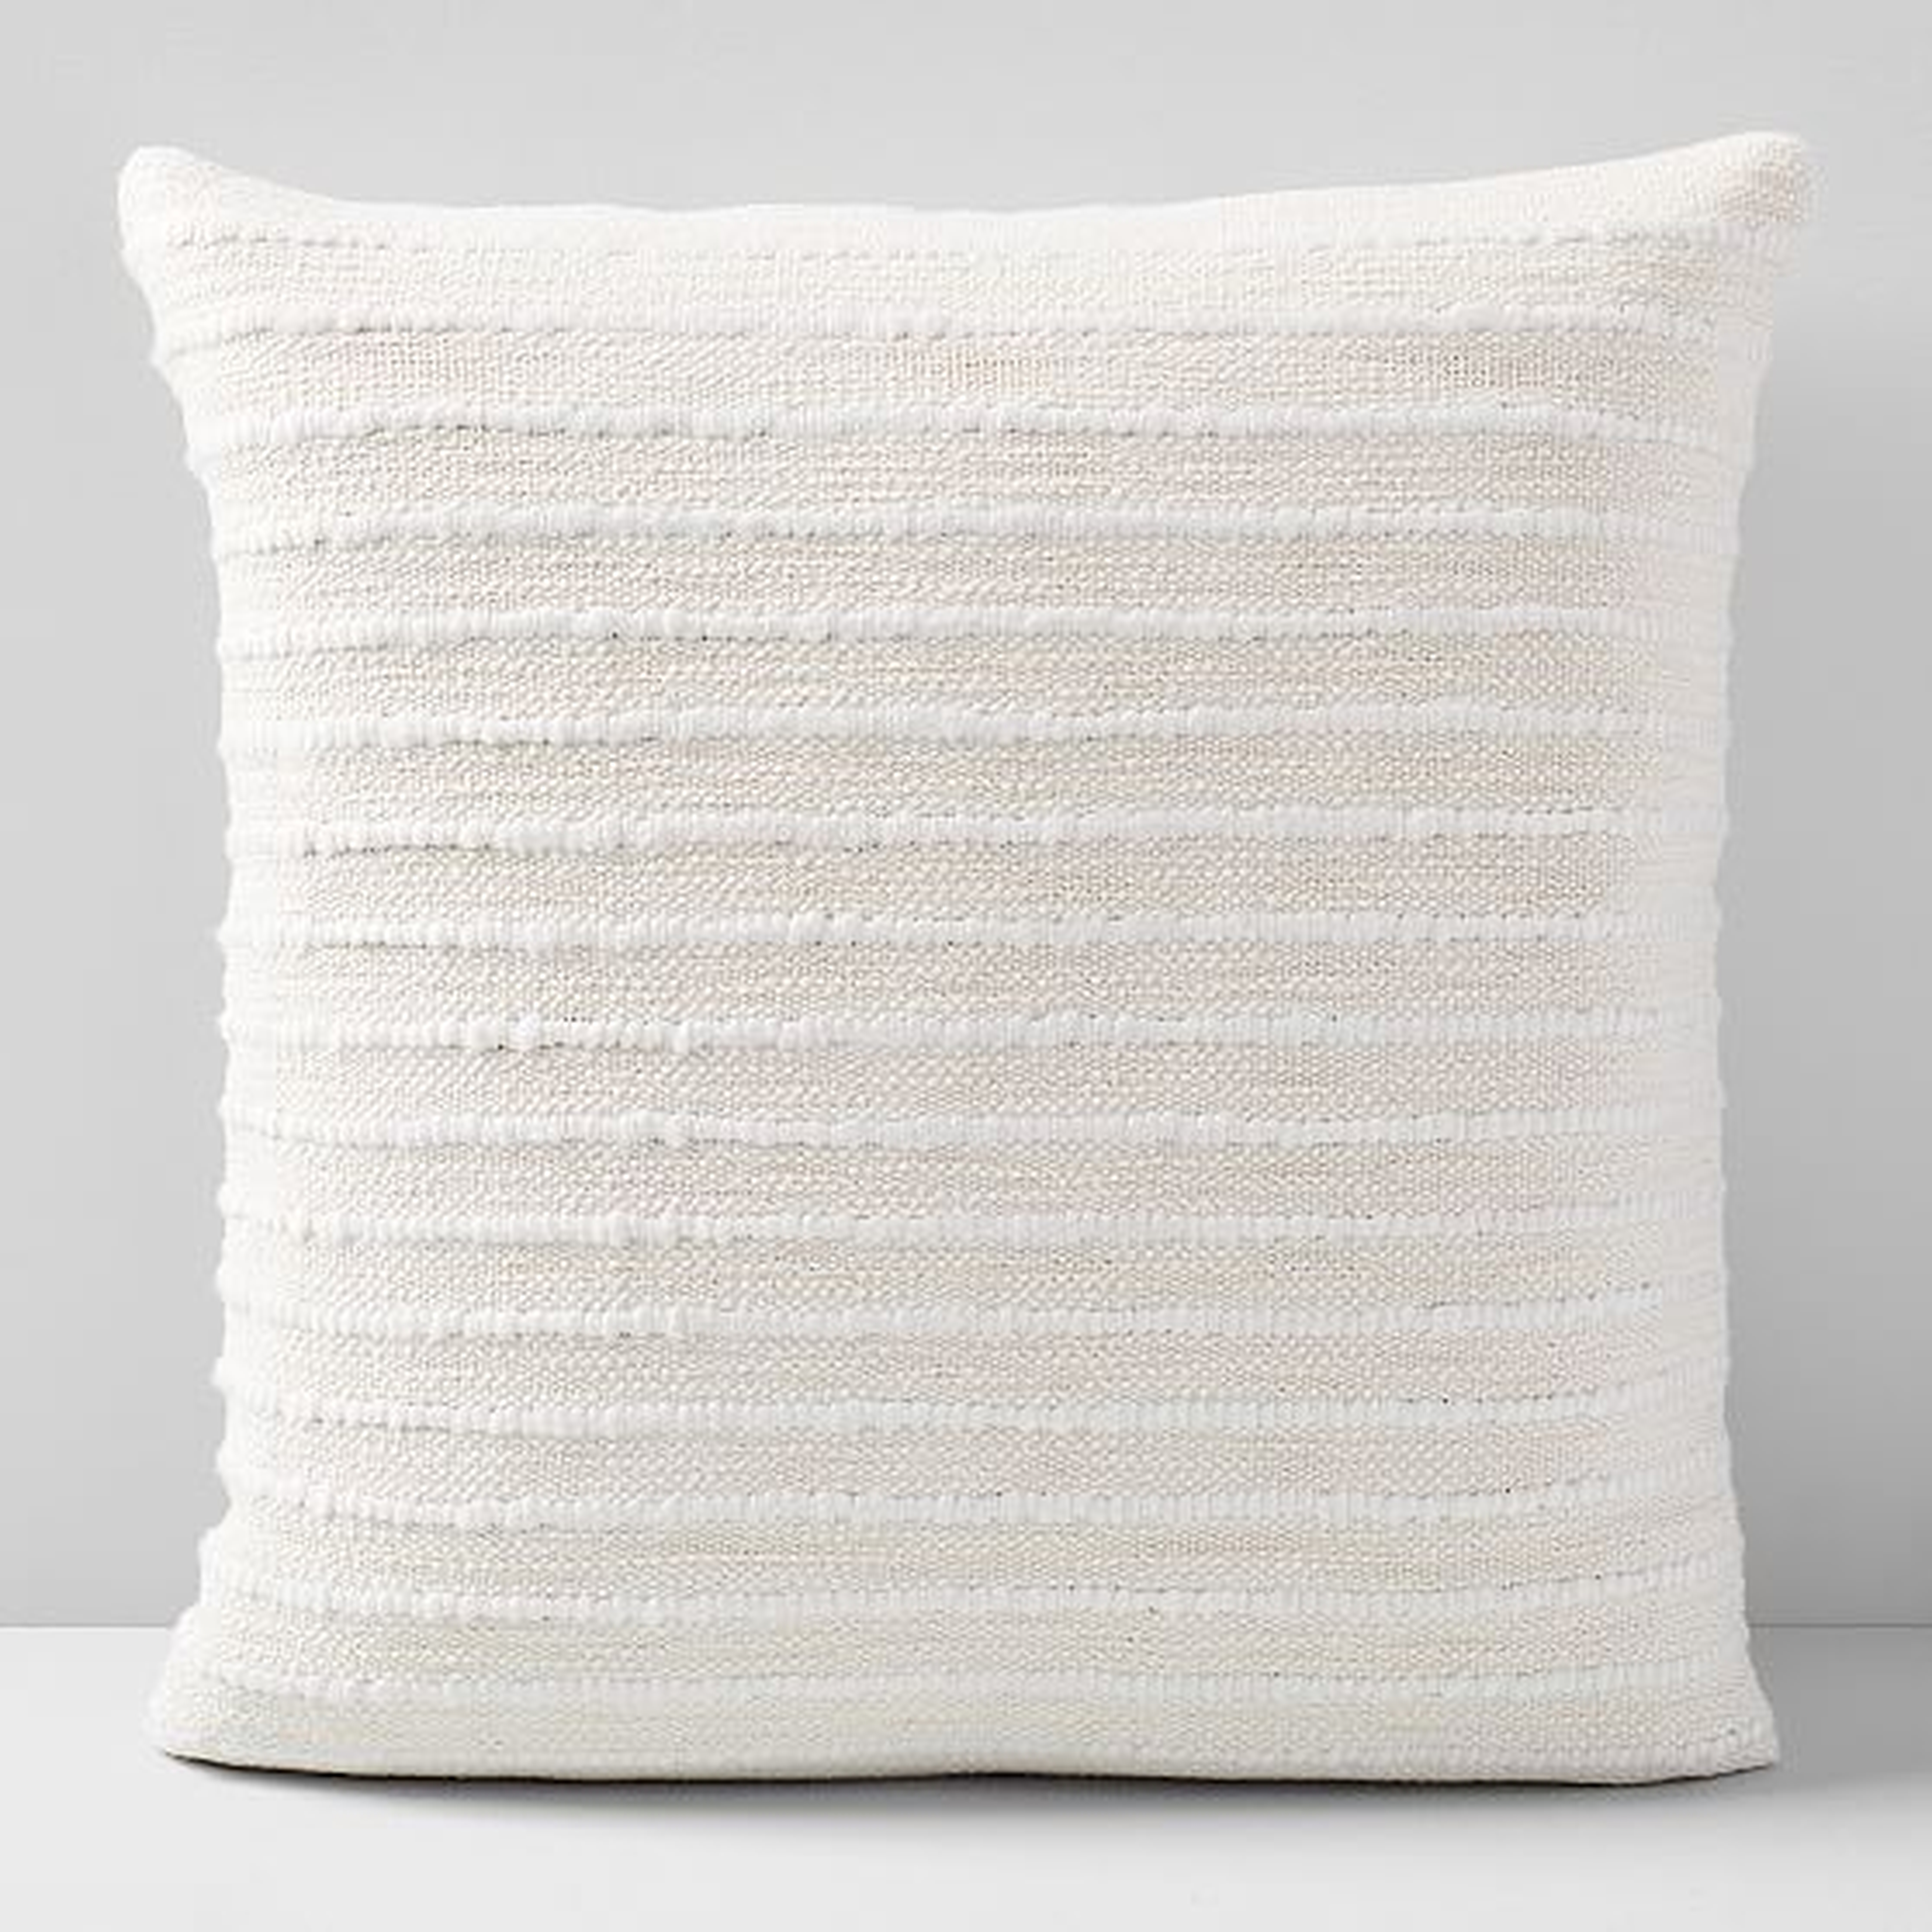 Soft Corded Pillow Cover with Down Alternative Insert, Natural Canvas, 20"x20" - West Elm